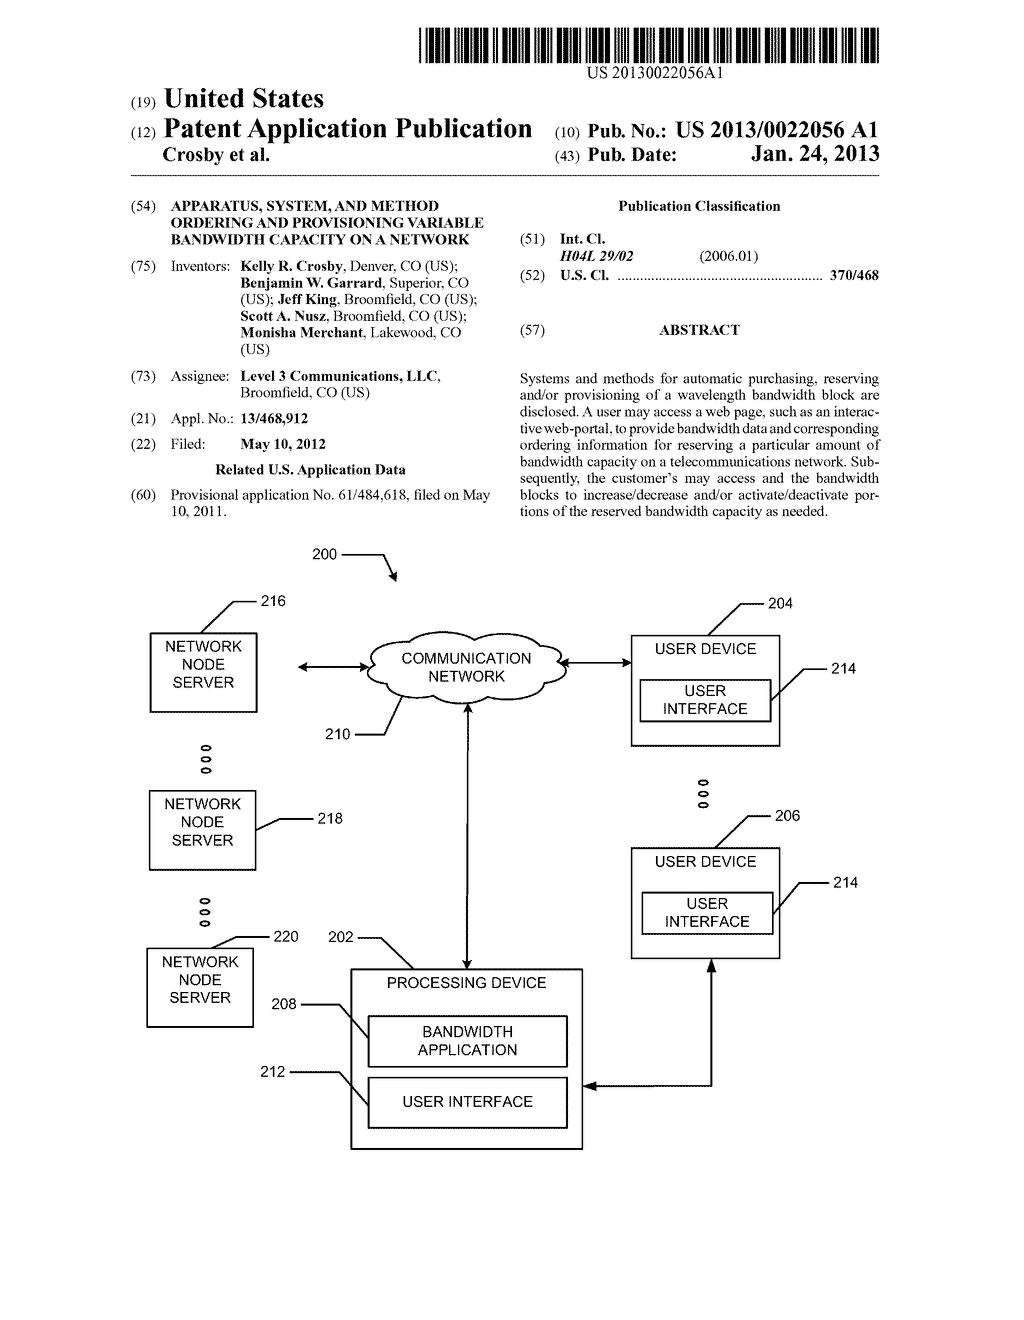 APPARATUS, SYSTEM, AND METHOD ORDERING AND PROVISIONING VARIABLE BANDWIDTH     CAPACITY ON A NETWORK - diagram, schematic, and image 01